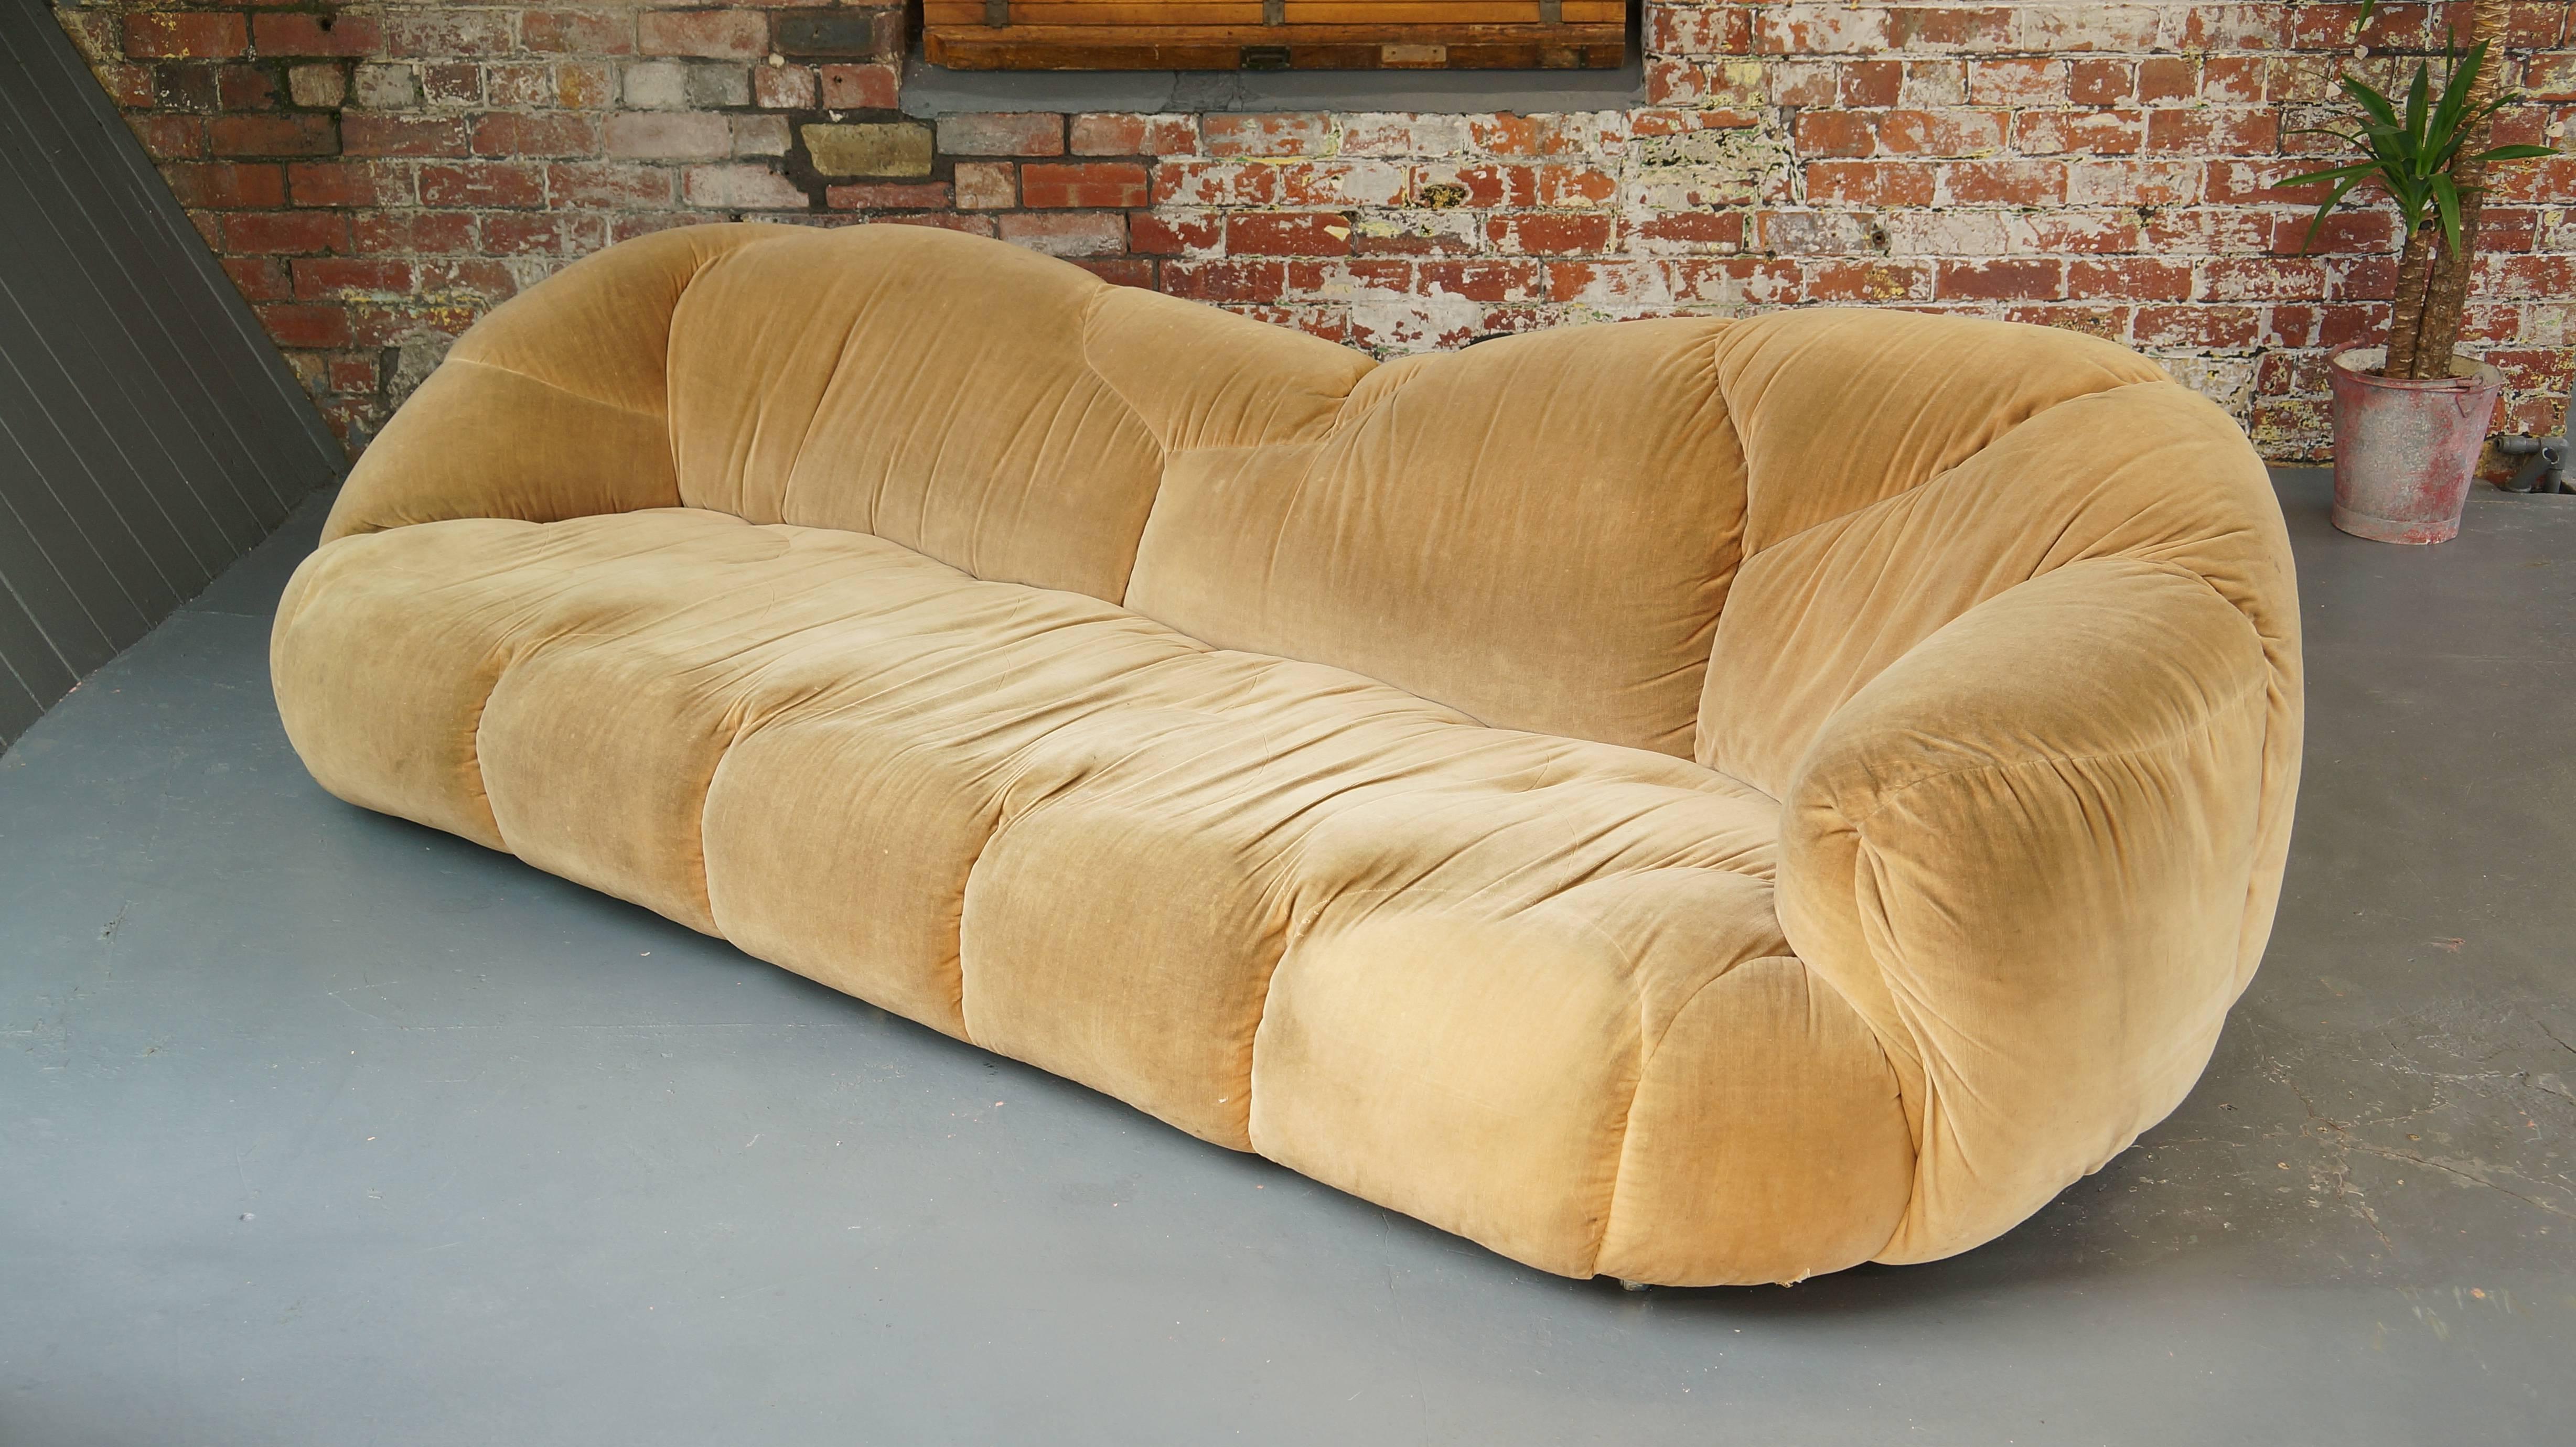 English Large Vintage 1970 HK Cloud Sofa by Howard Keith, Chaise Lounge or Chaise Longue